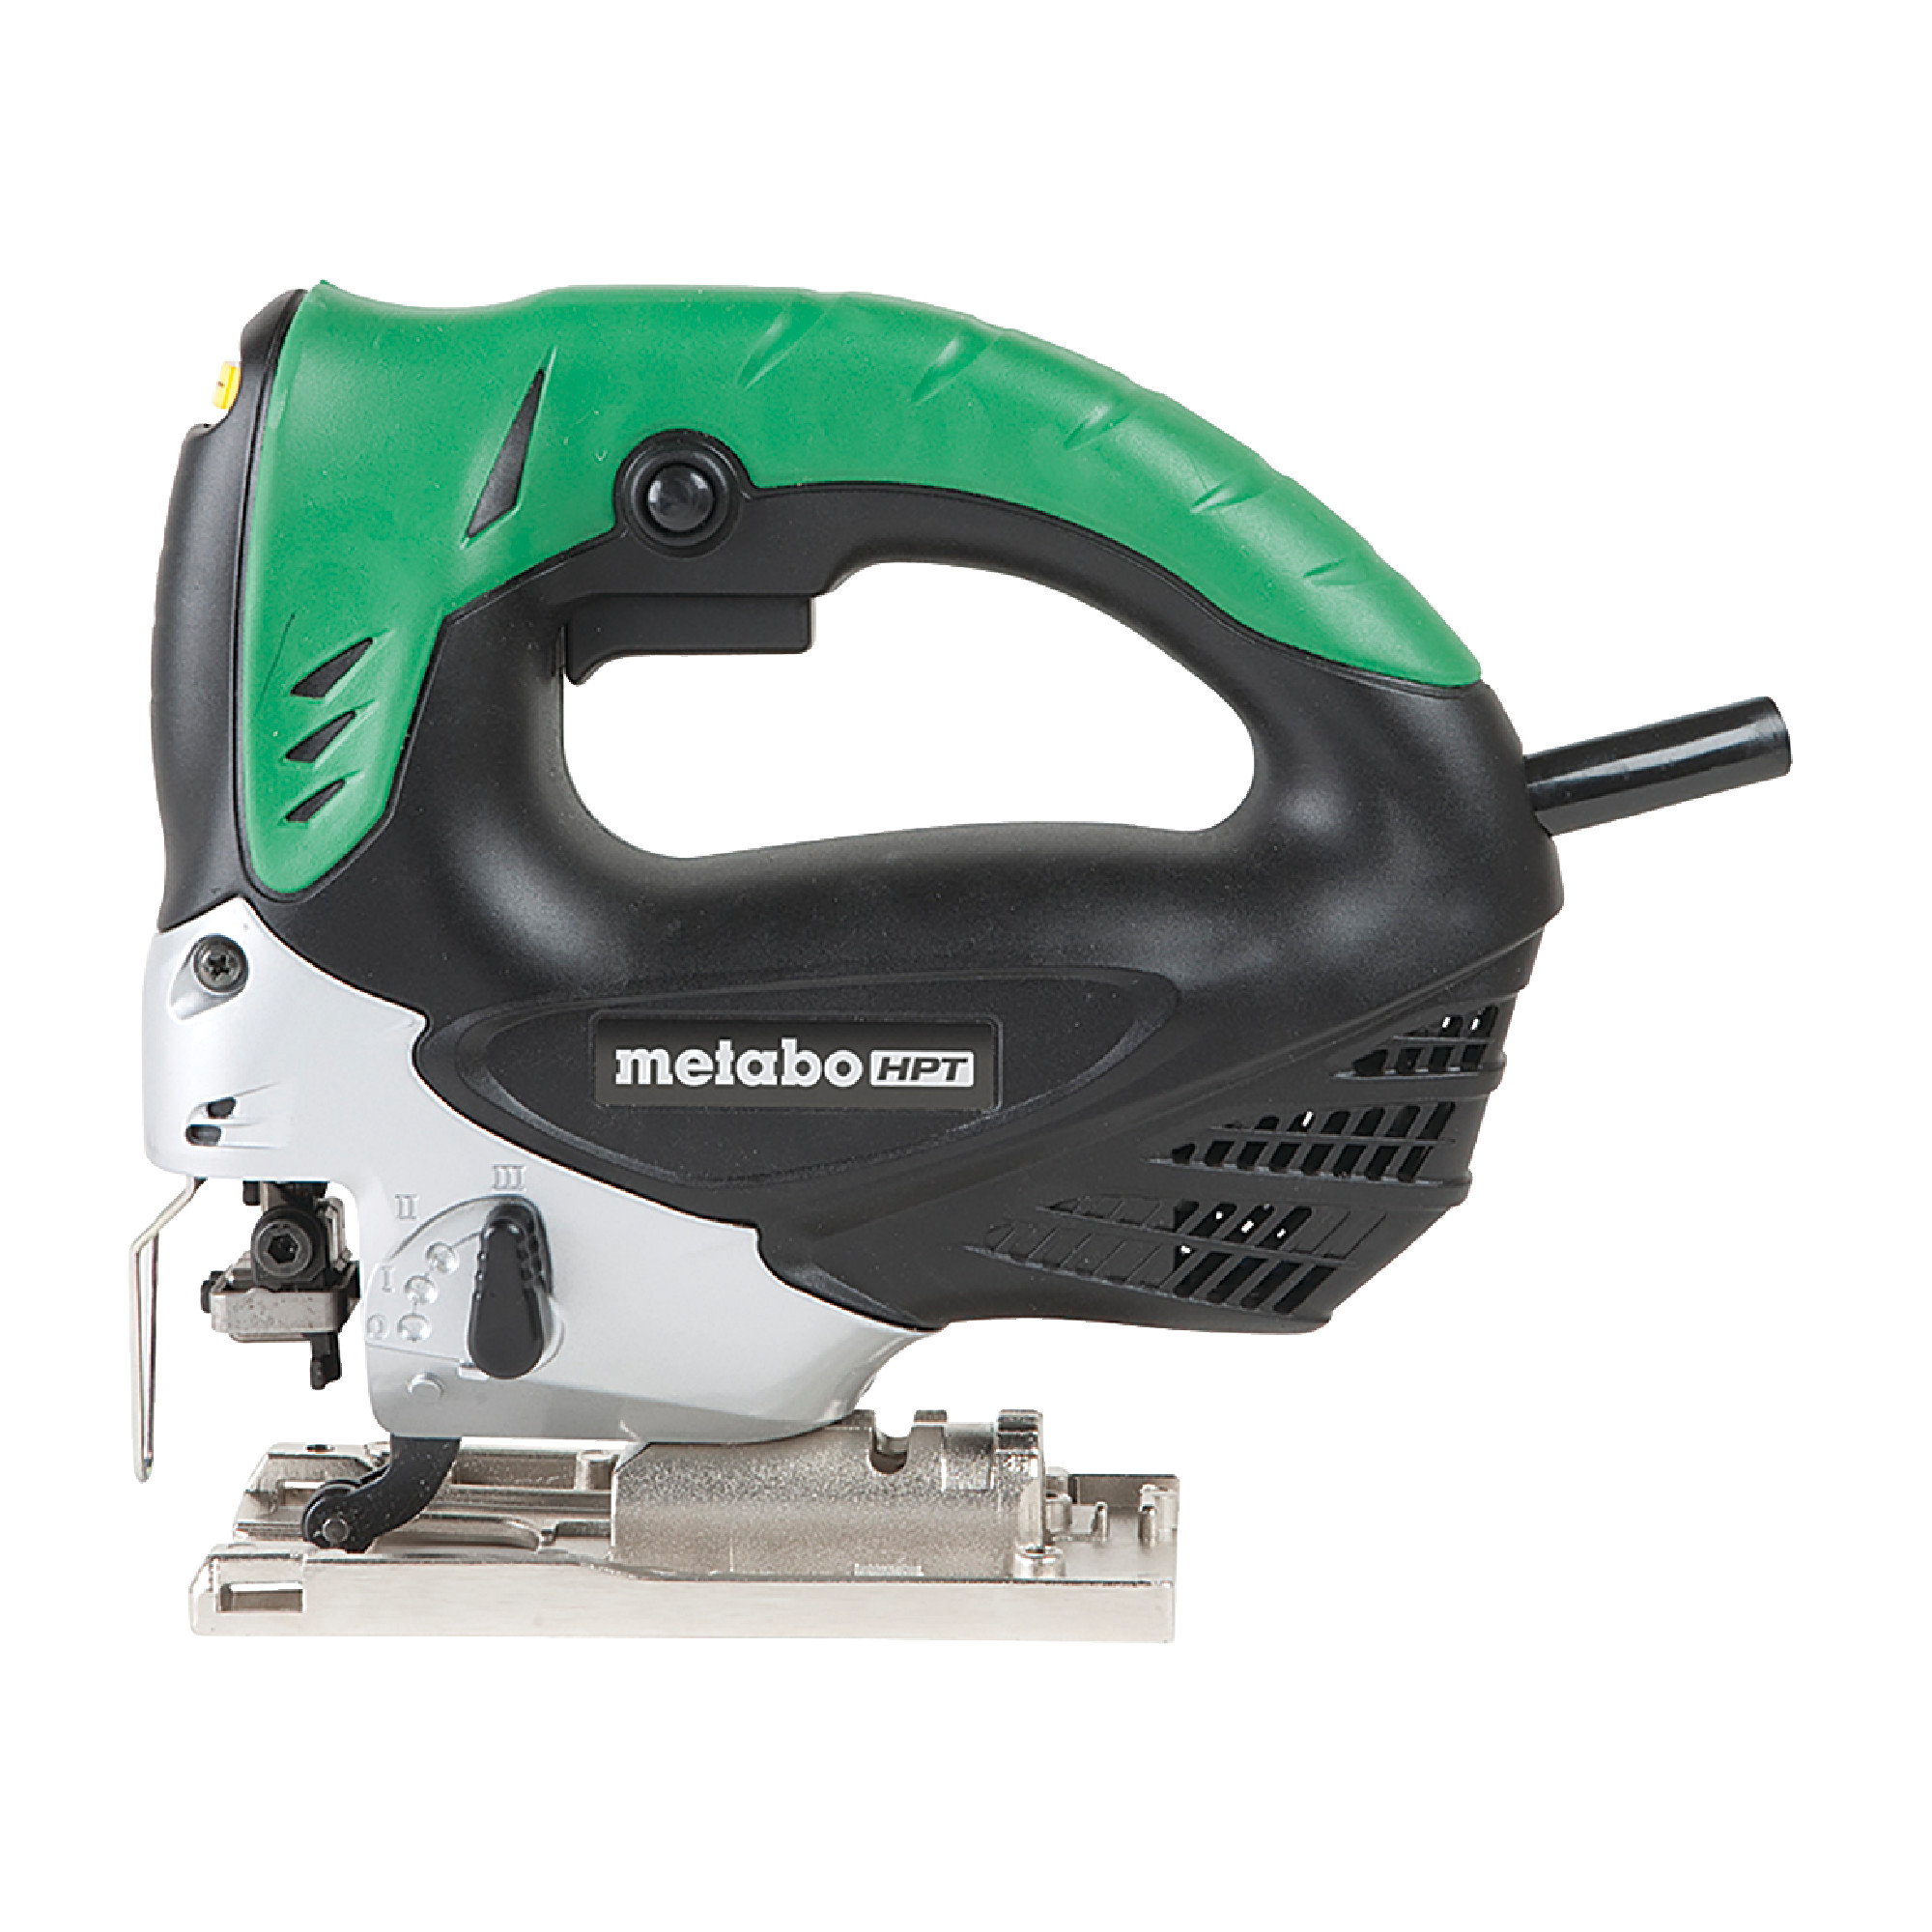 5.5 Amp Corded Jigsaw With Case